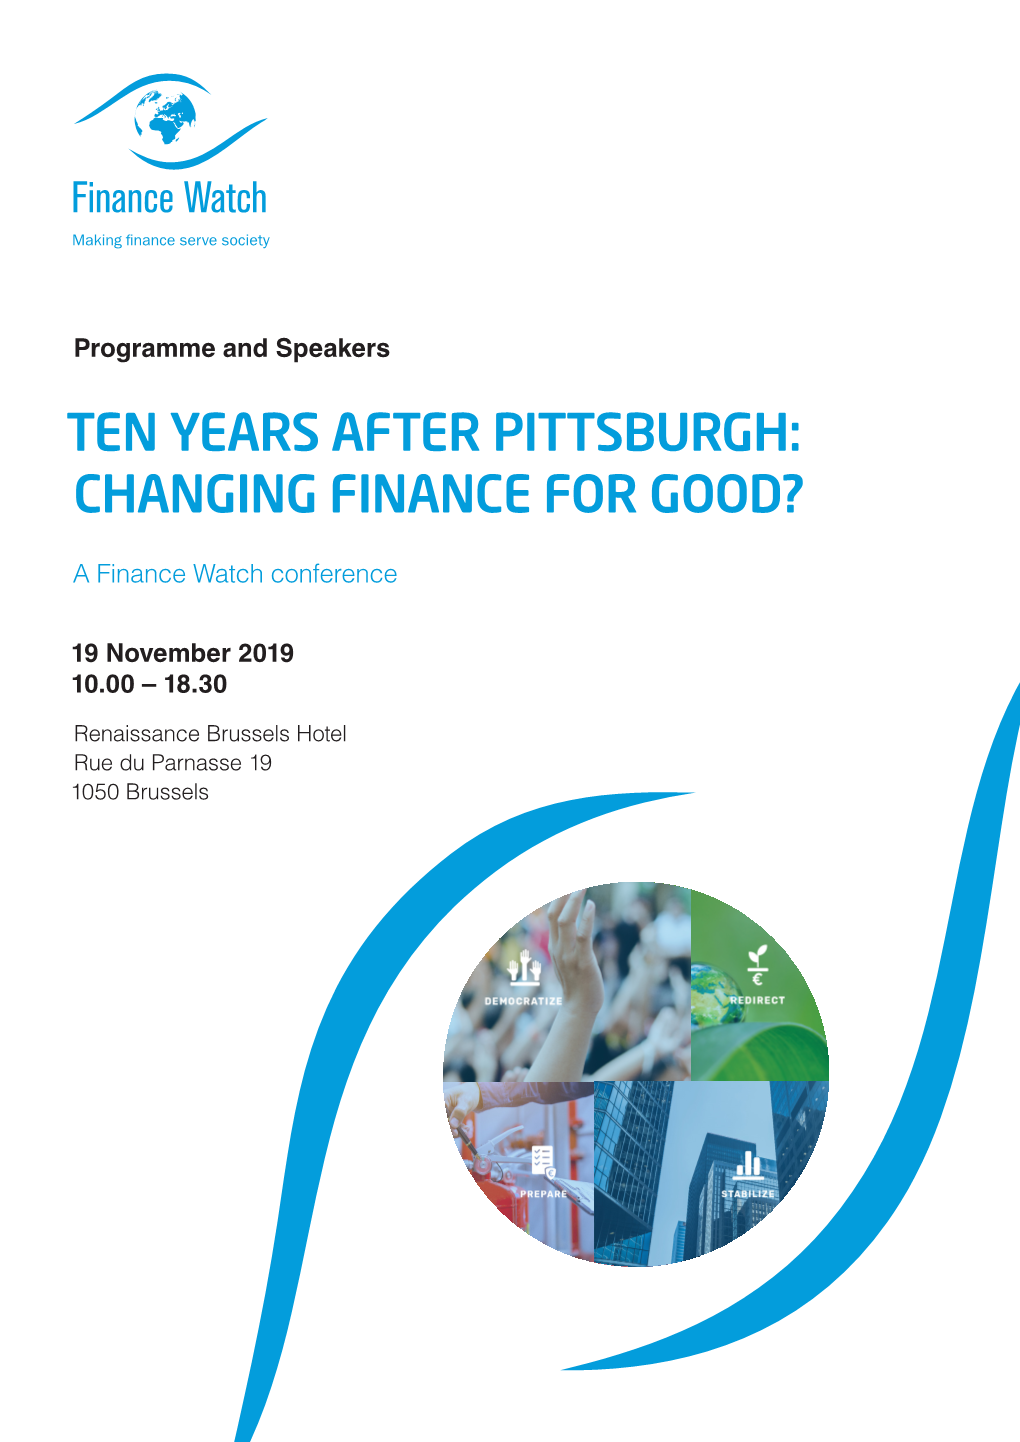 Ten Years After Pittsburgh: Changing Finance for Good?